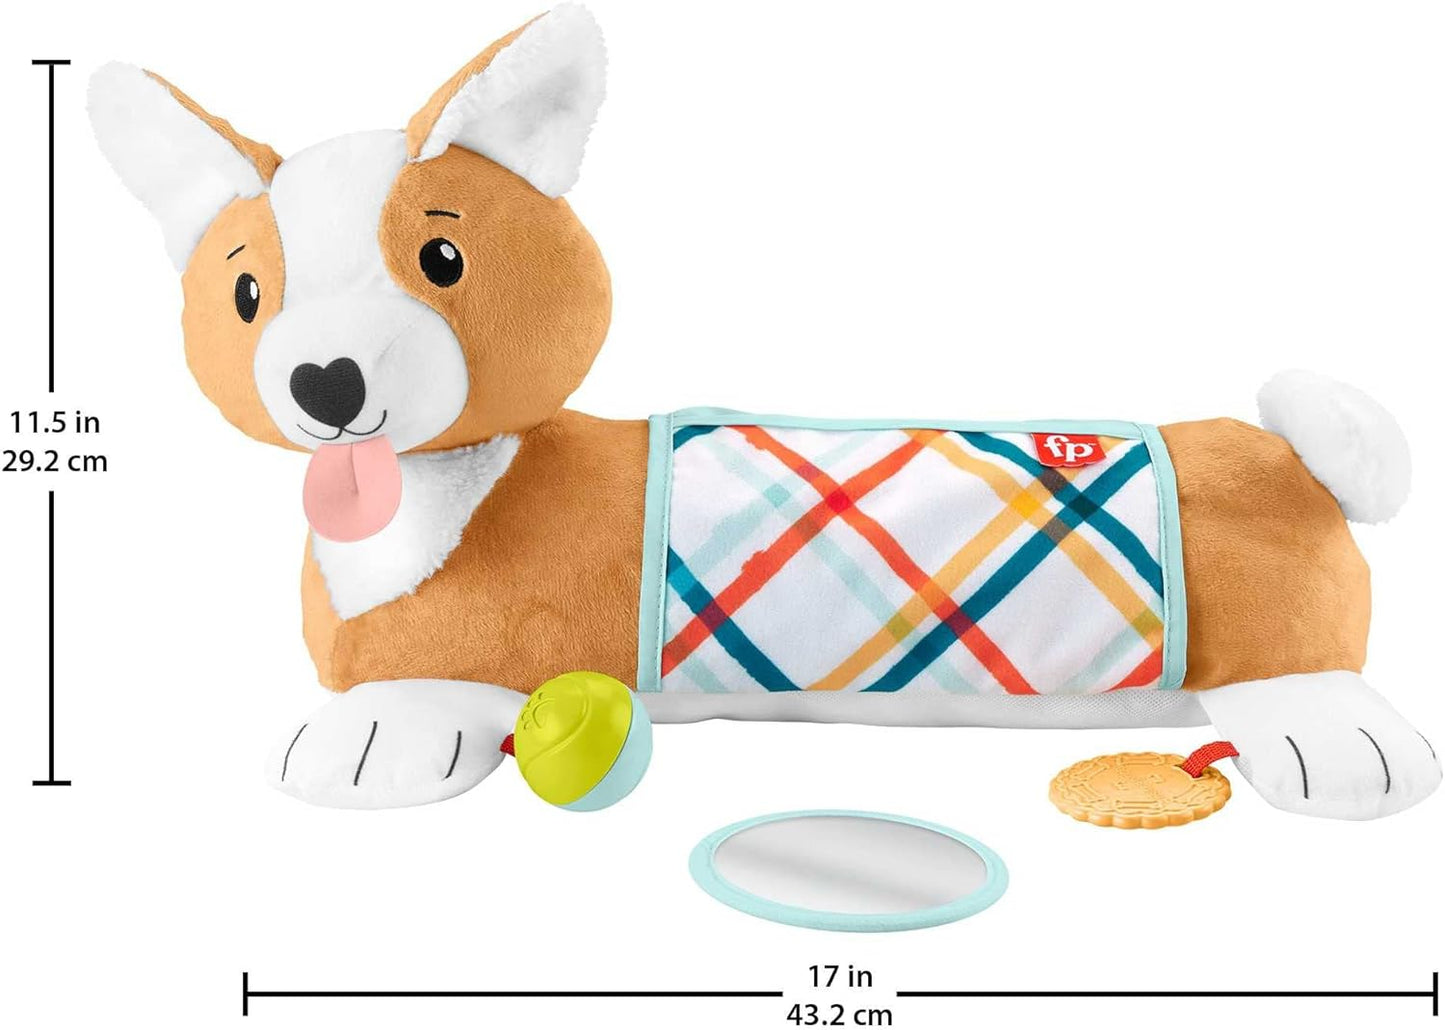 Fisher Price - 3-In-1 Puppy Tummy Wedge Plush With Teether Rattle & Mirror Toys